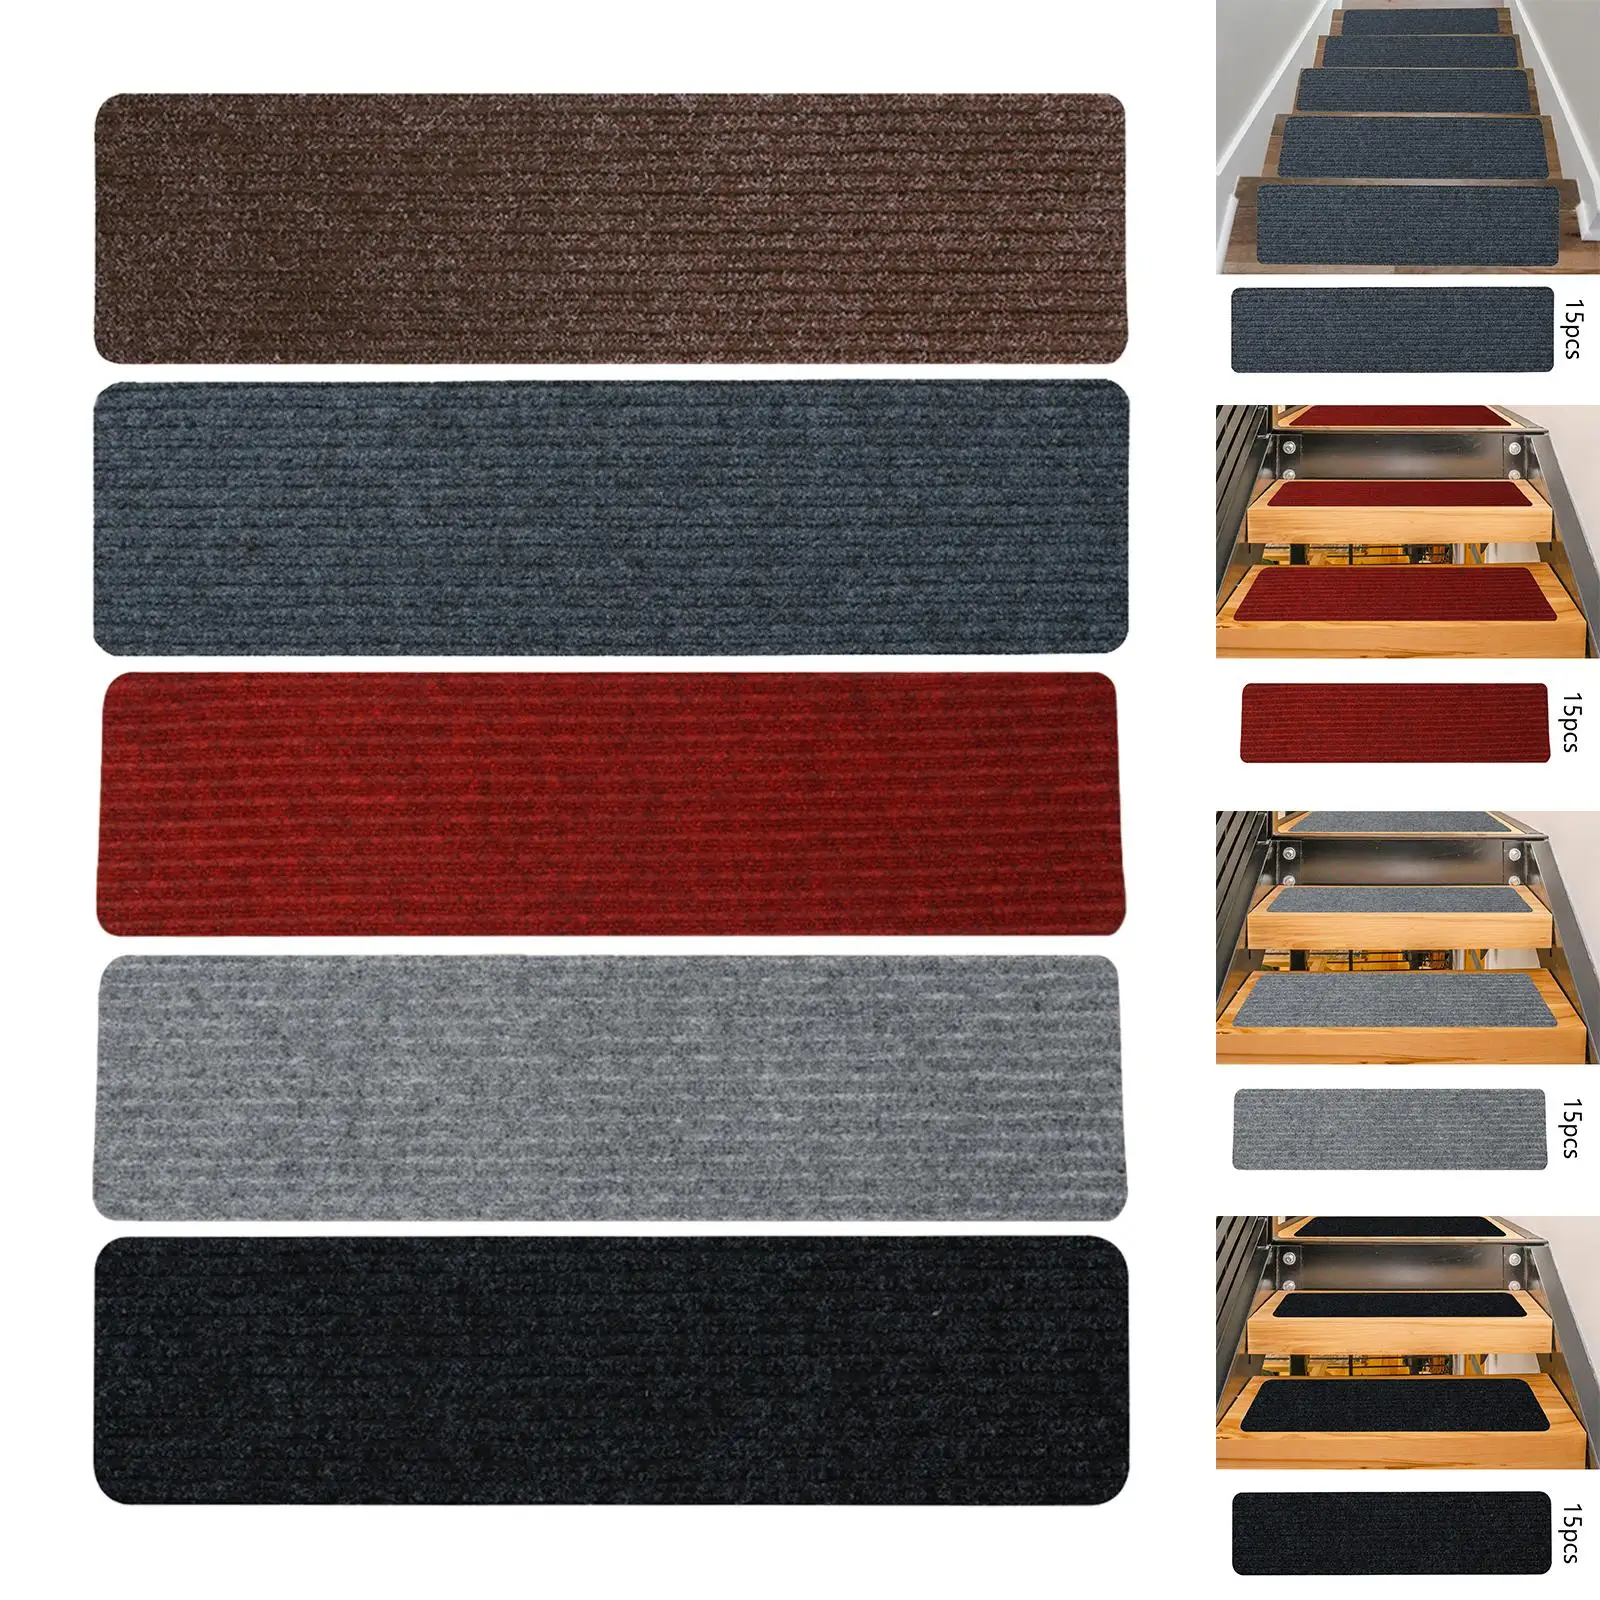 

15 Pieces Stair Rugs Stair Runner Stair Treads Stair Mats for Dogs Kids Wooden Steps Pets Elders Polyester Non Slip Carpet